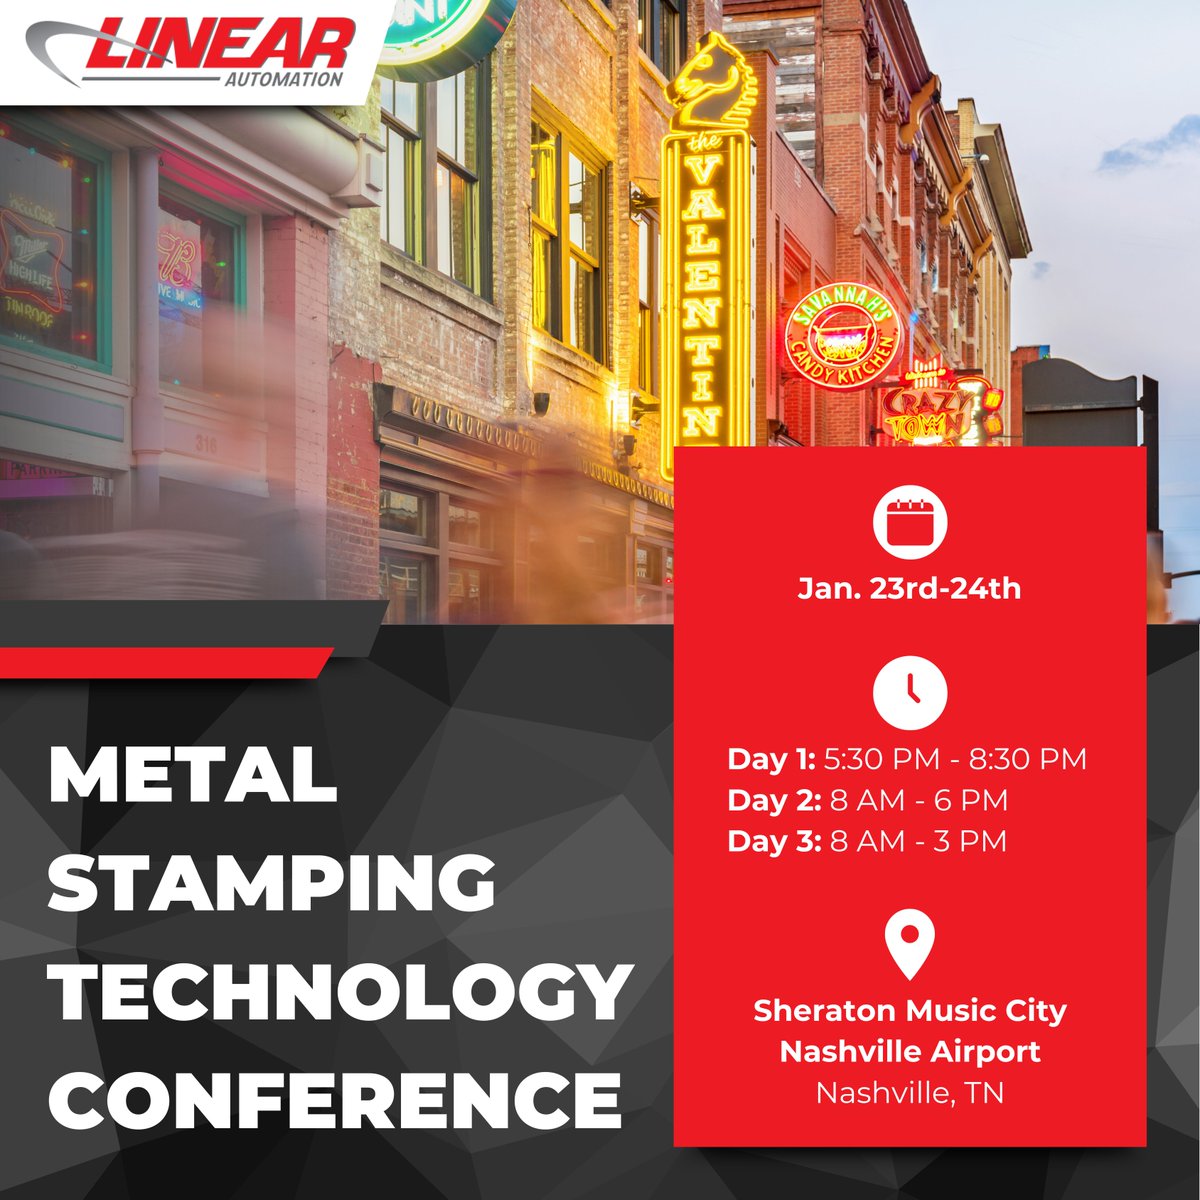 🌟 Exciting News! Linear is returning to the PMA Metal Stamping Technology Conference in 2024! 🌟

📅 Date: Jan. 23rd - 24th
📍 Location: Sheraton Music City Nashville Airport

See you there!

#linear #automation #tennessee #metalstamping